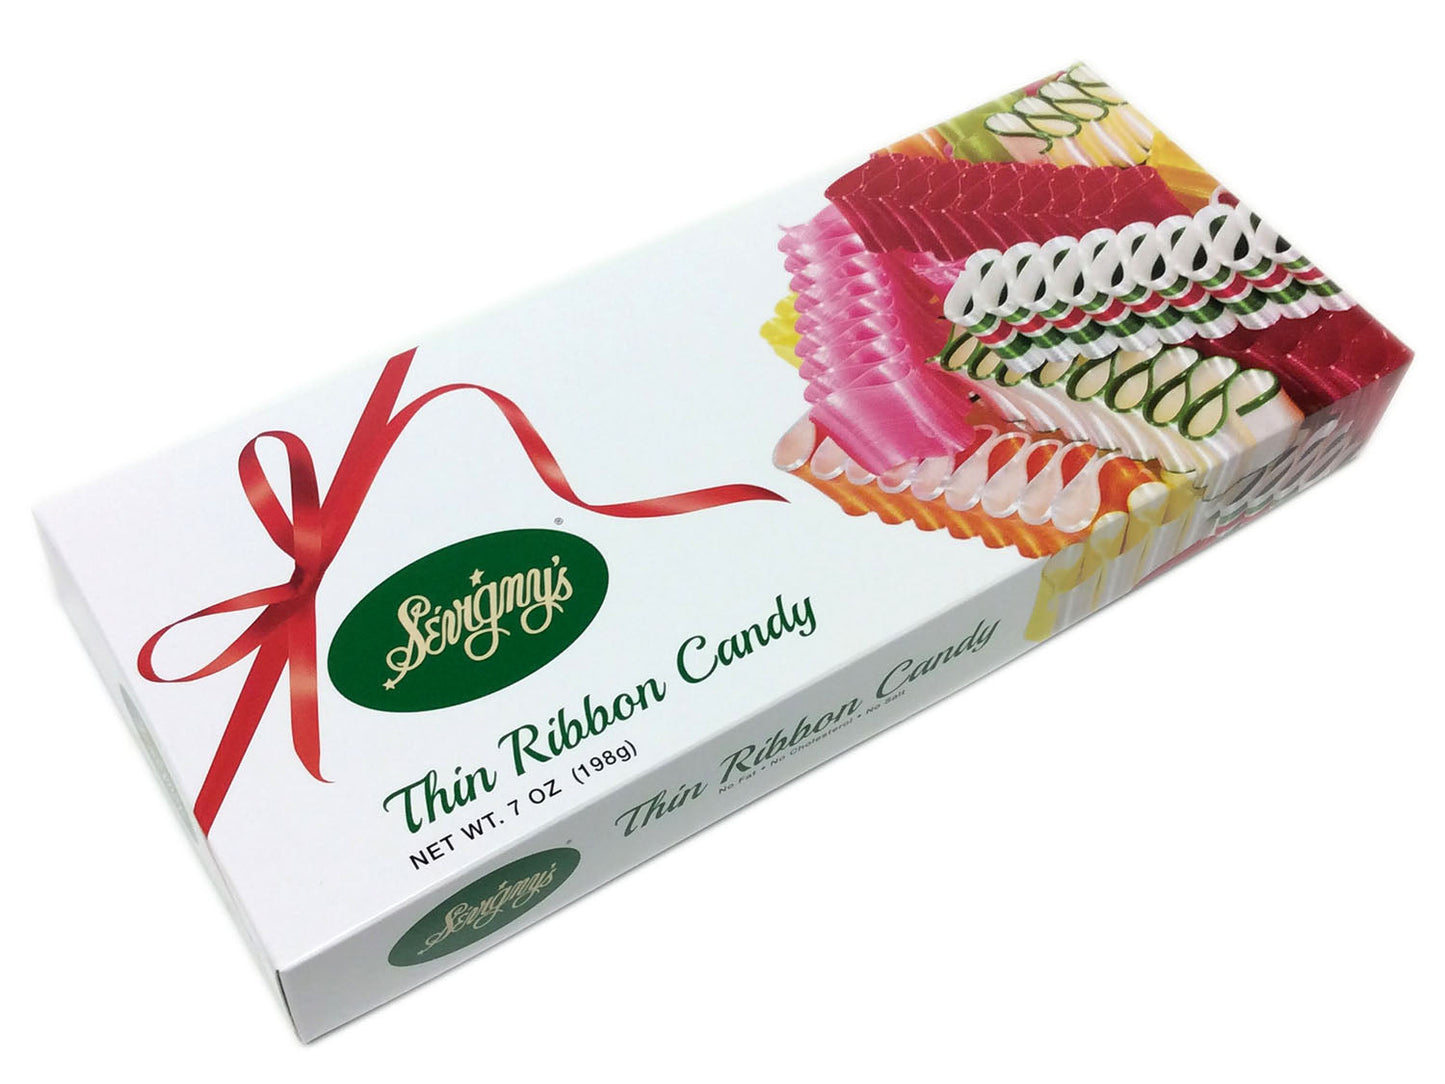 Thin Ribbon Candy - 7 oz box assorted flavors